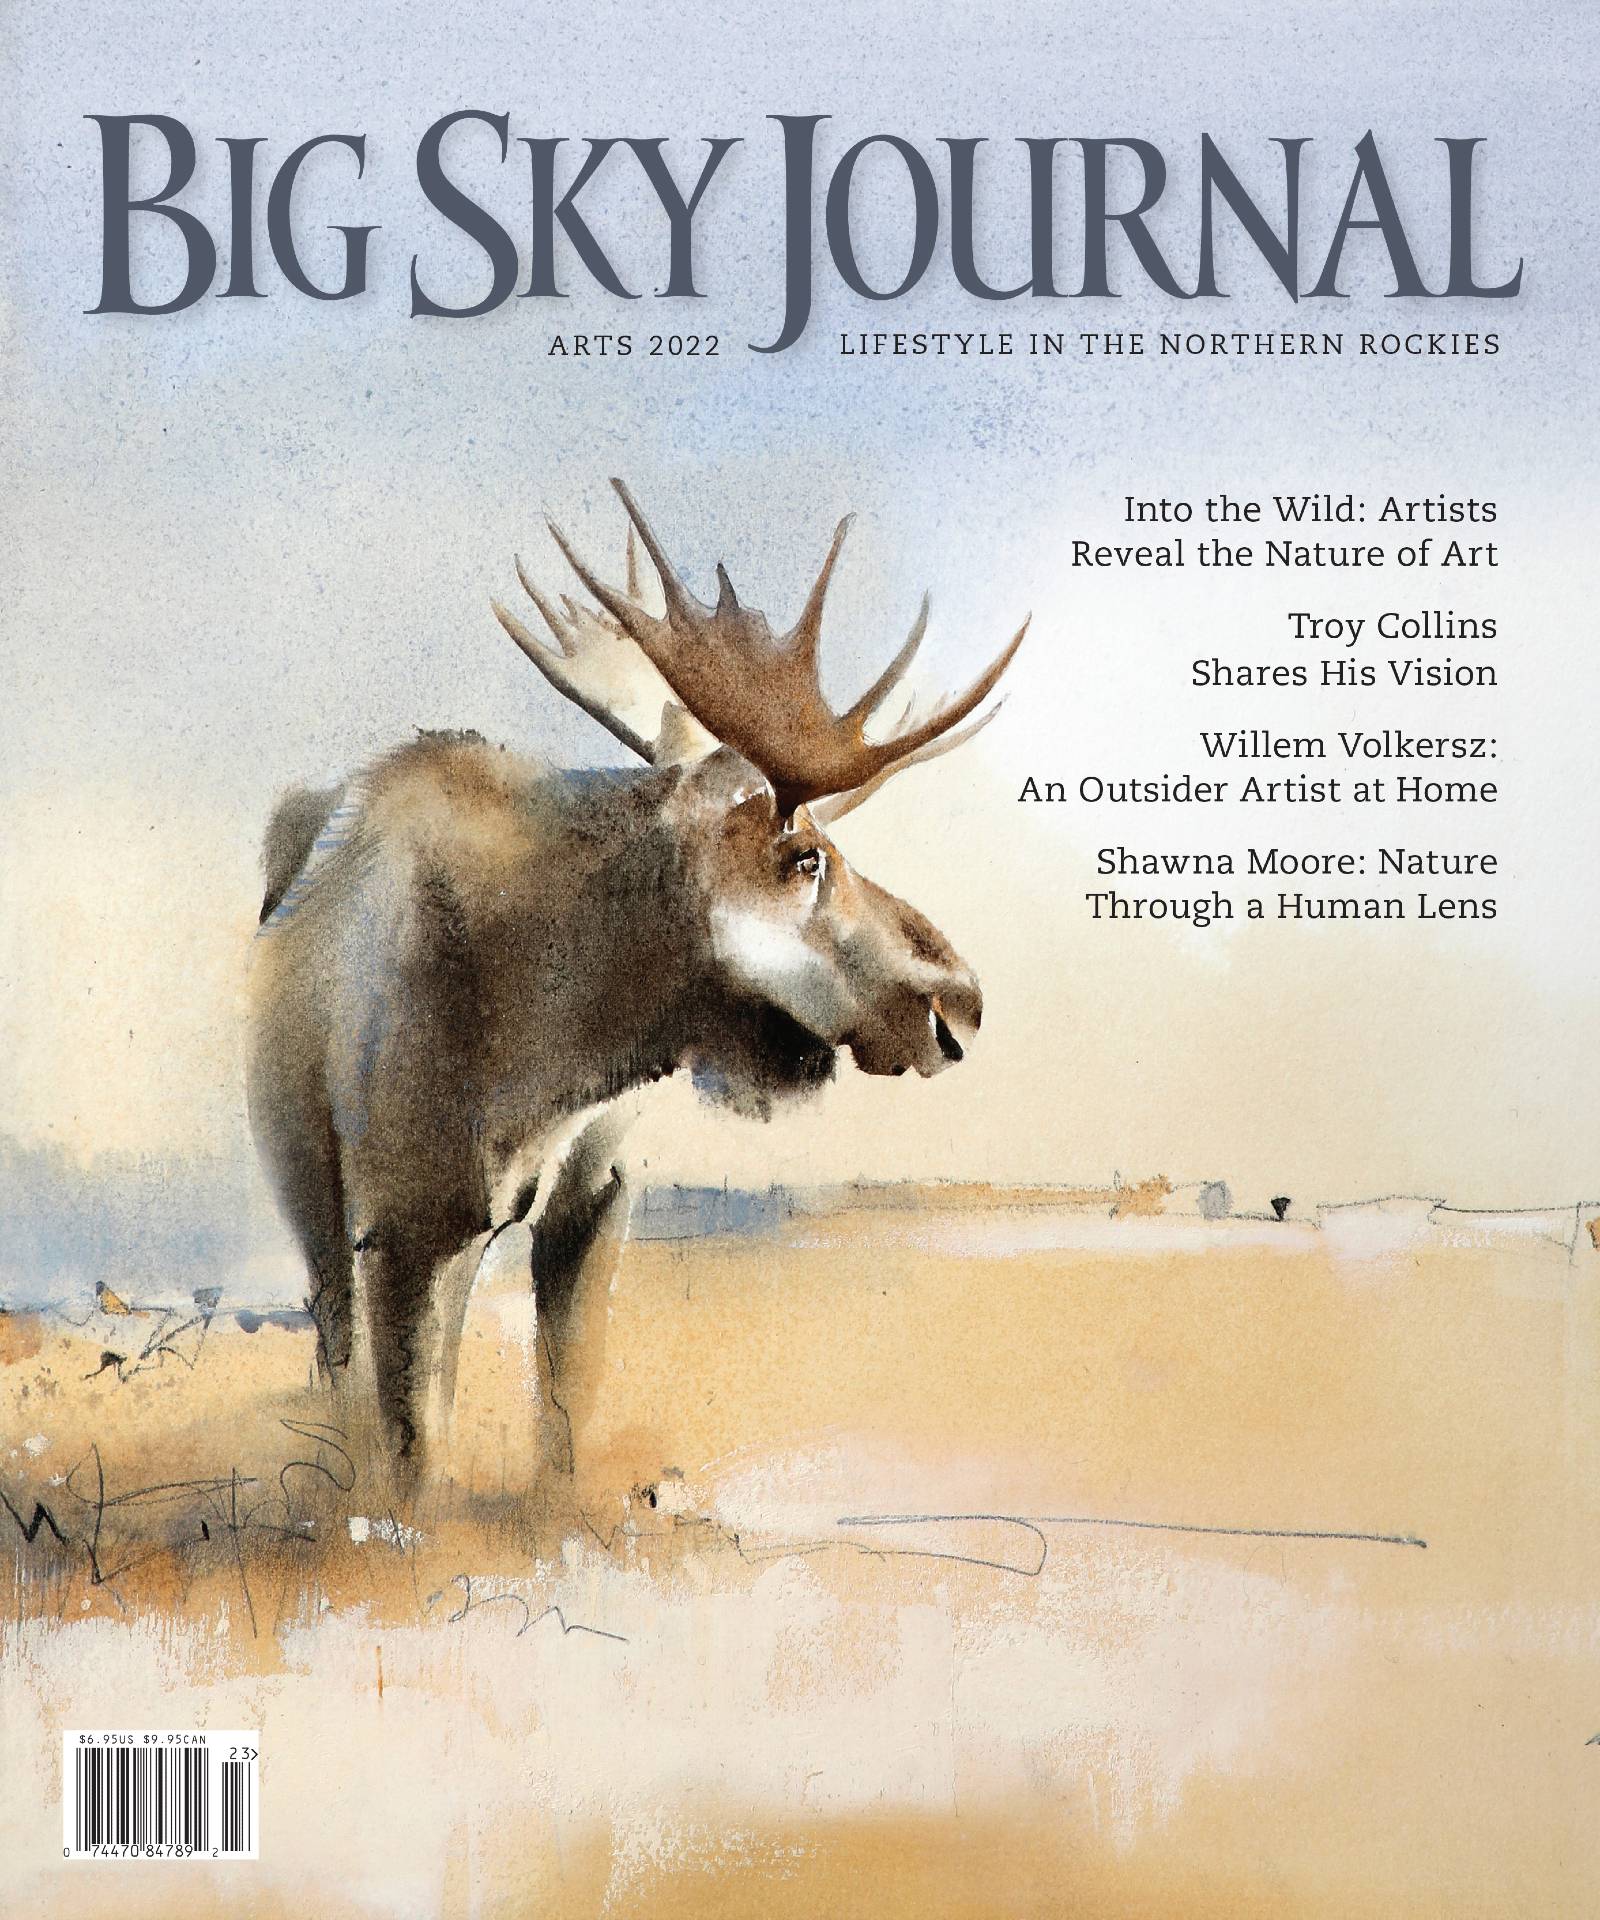 Subscribe to Big Sky Journal and Explore Montanas Culture and Lifestyle